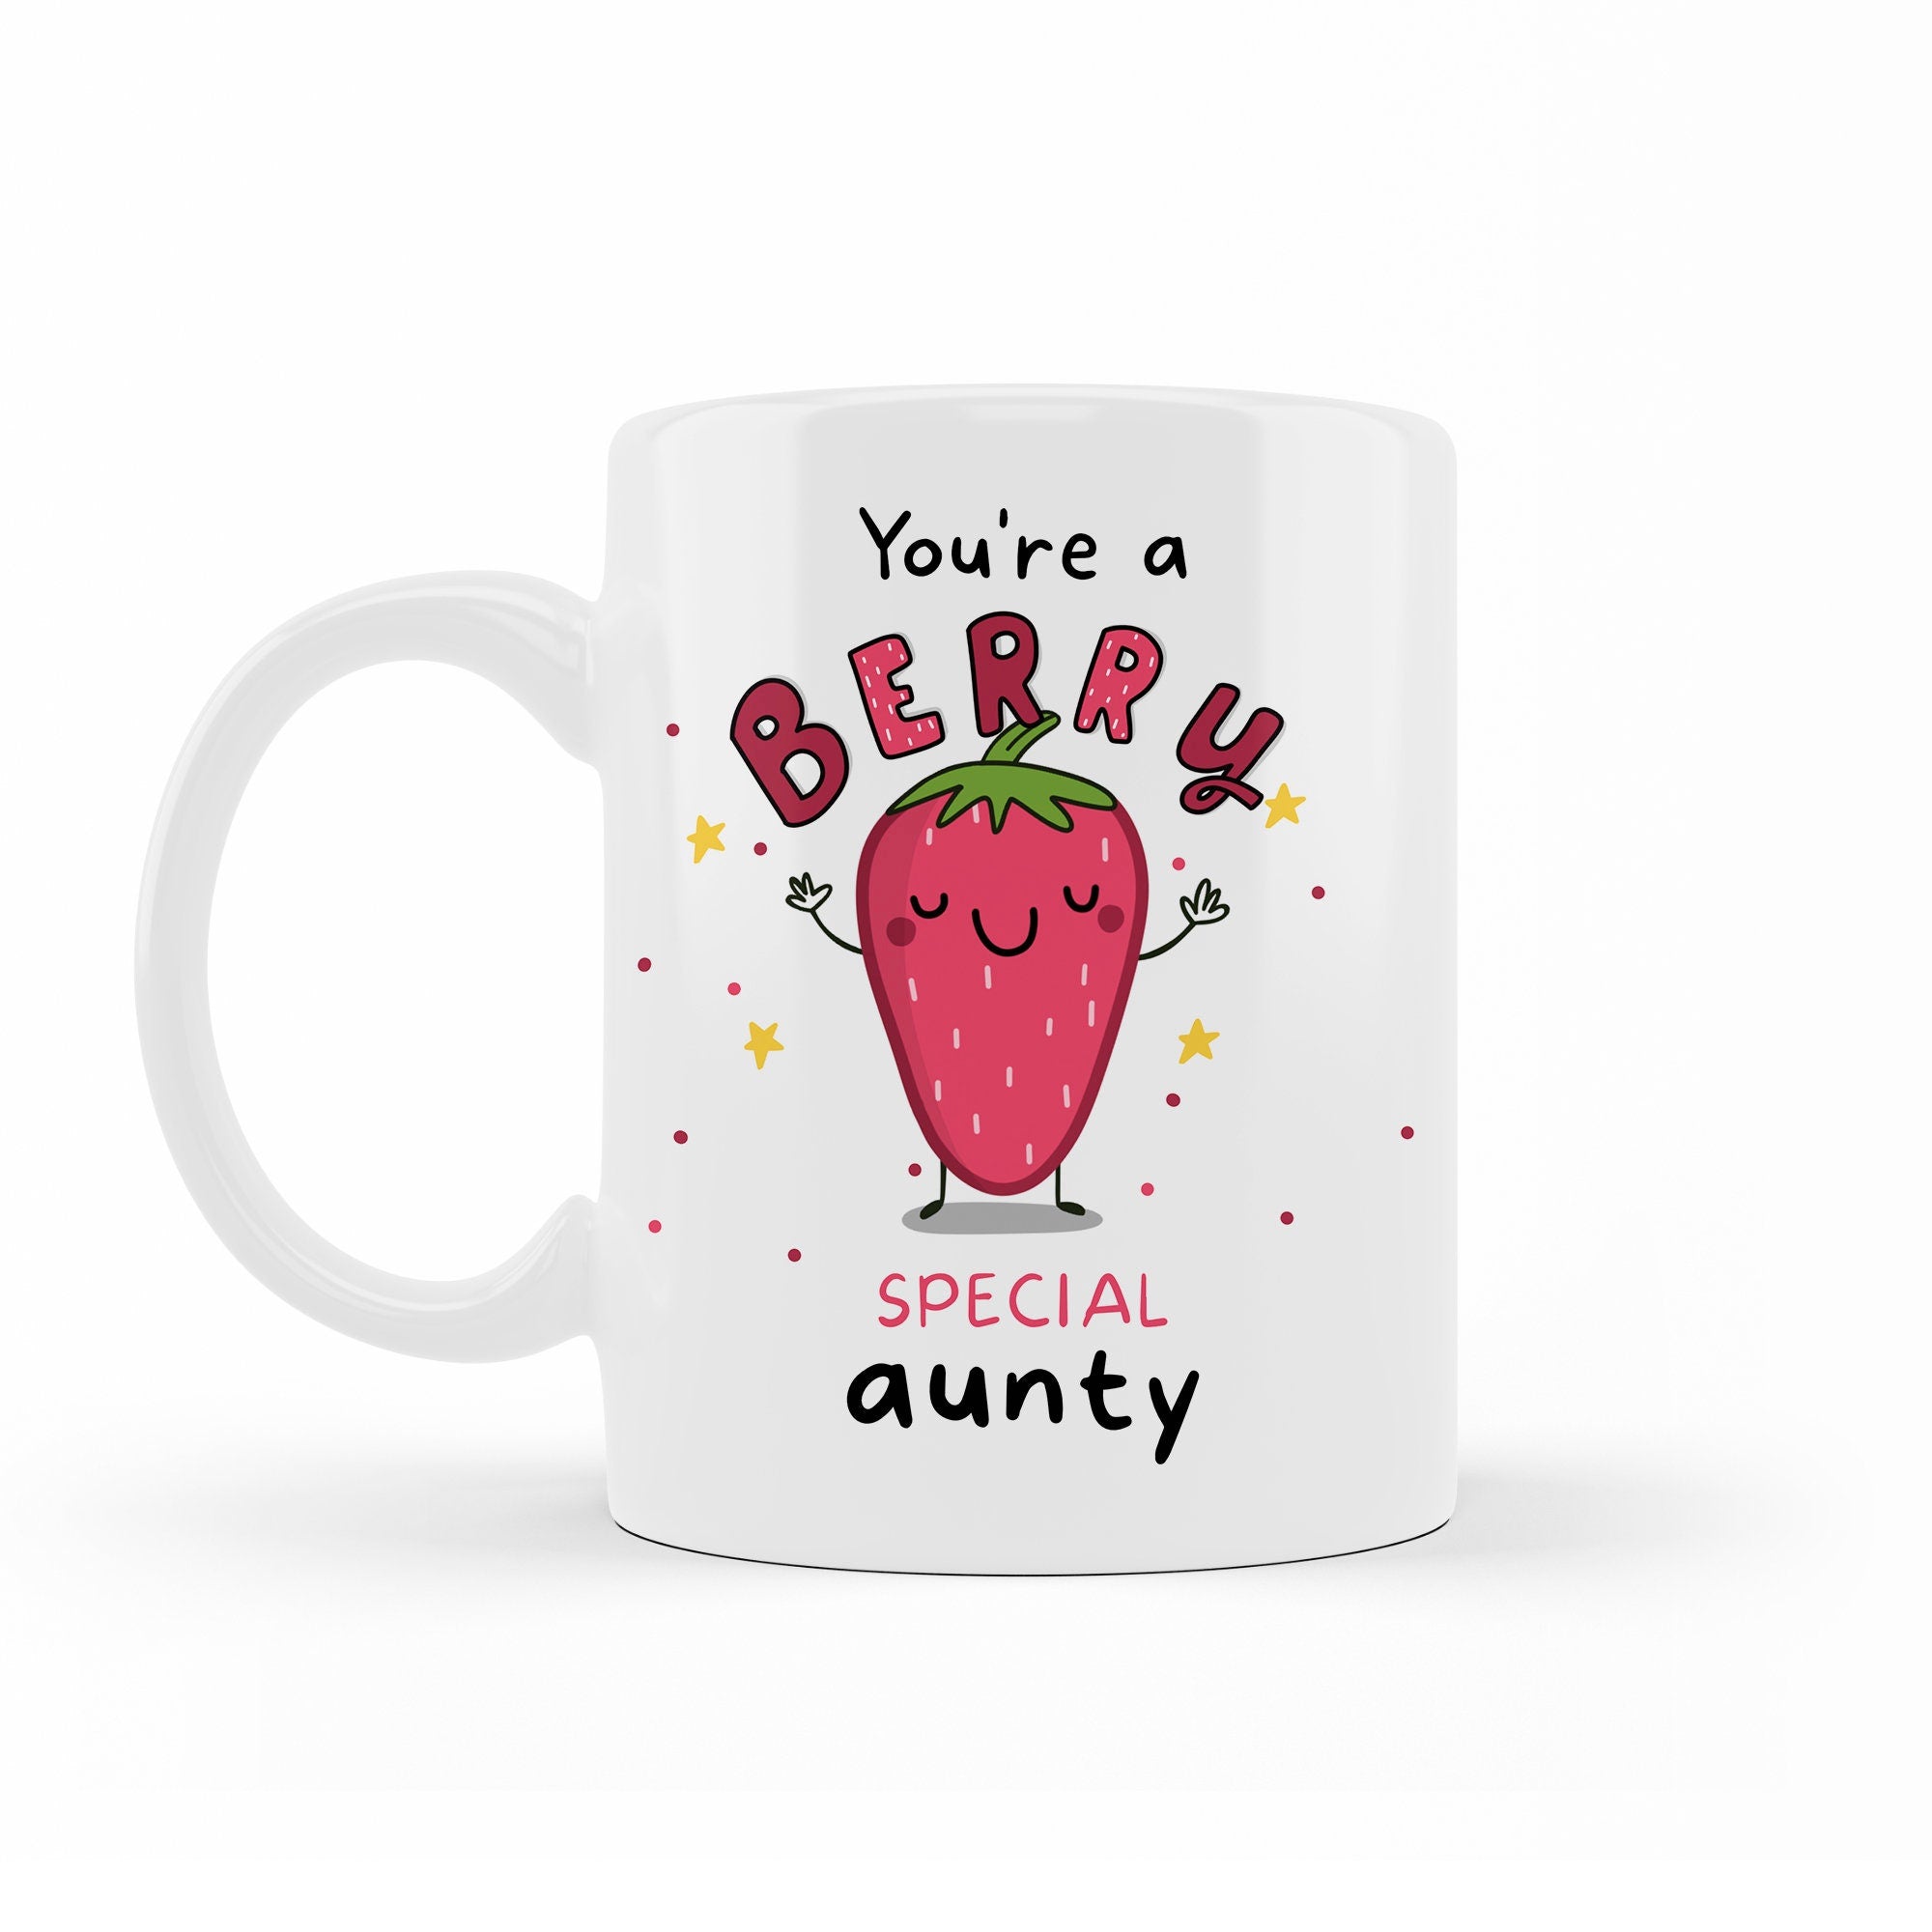 You're A Berry Special Aunty, Auntie mug, Auntie gift, for my Auntie